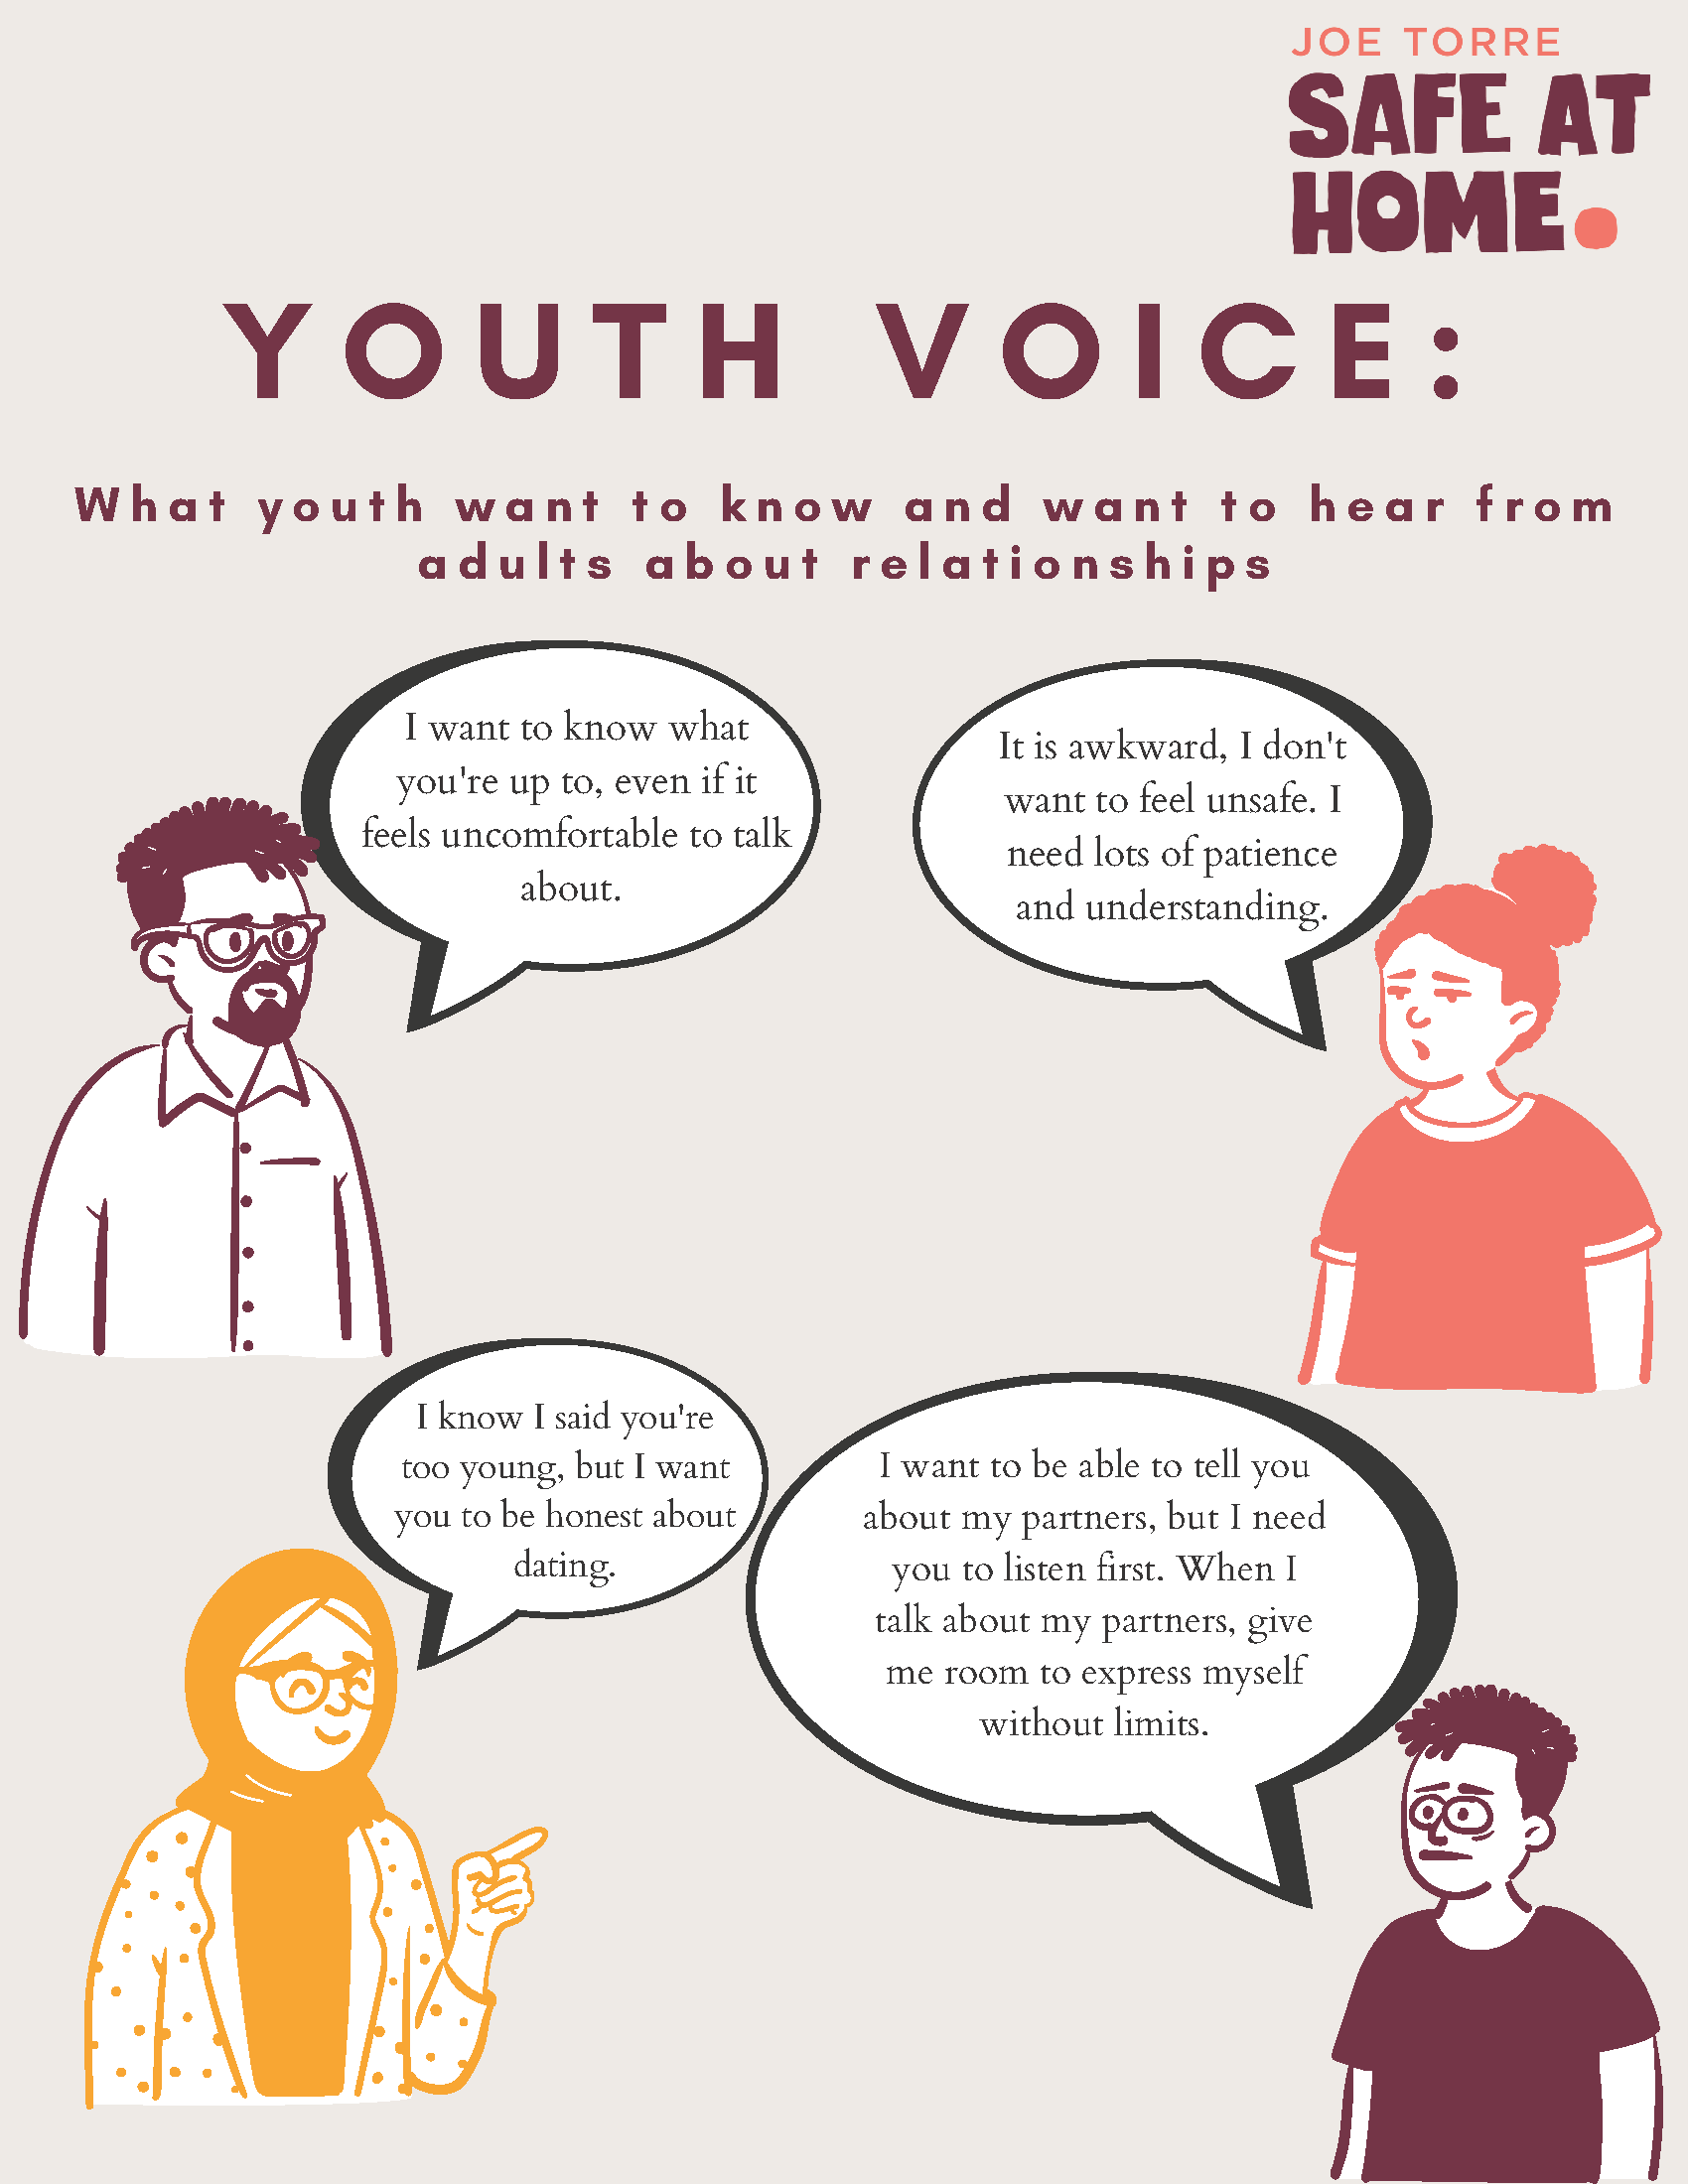 https://joetorre.org/wp-content/uploads/2022/09/Youth-Voice_Relationships_Page_1.png